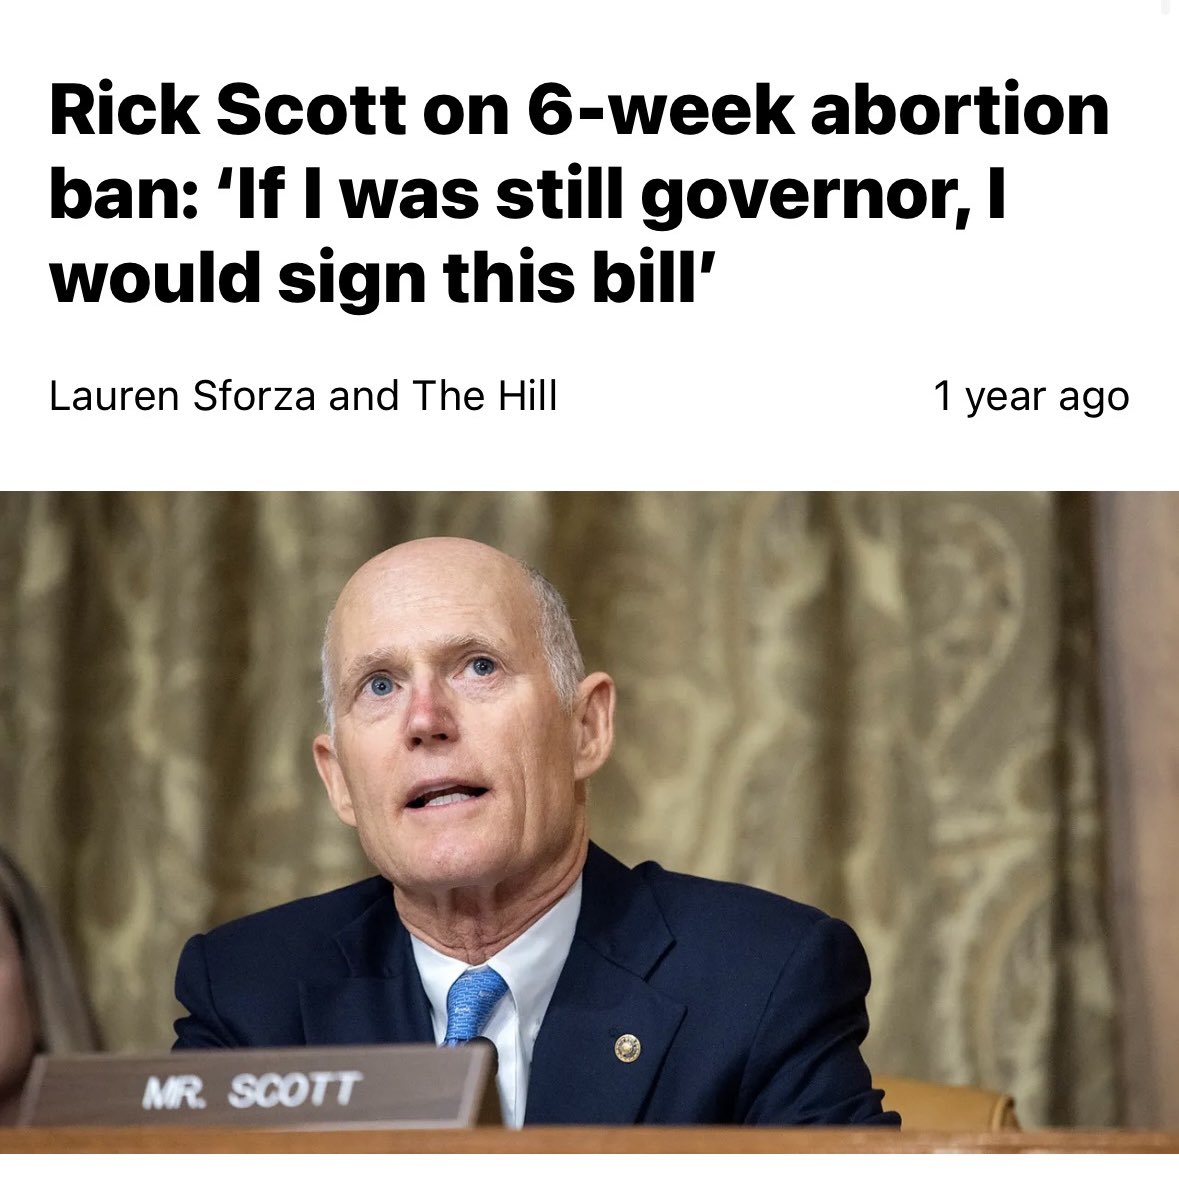 Reminder that Rick Scott proudly supports Florida’s near total ban on abortion with almost no exceptions for rape and incest.